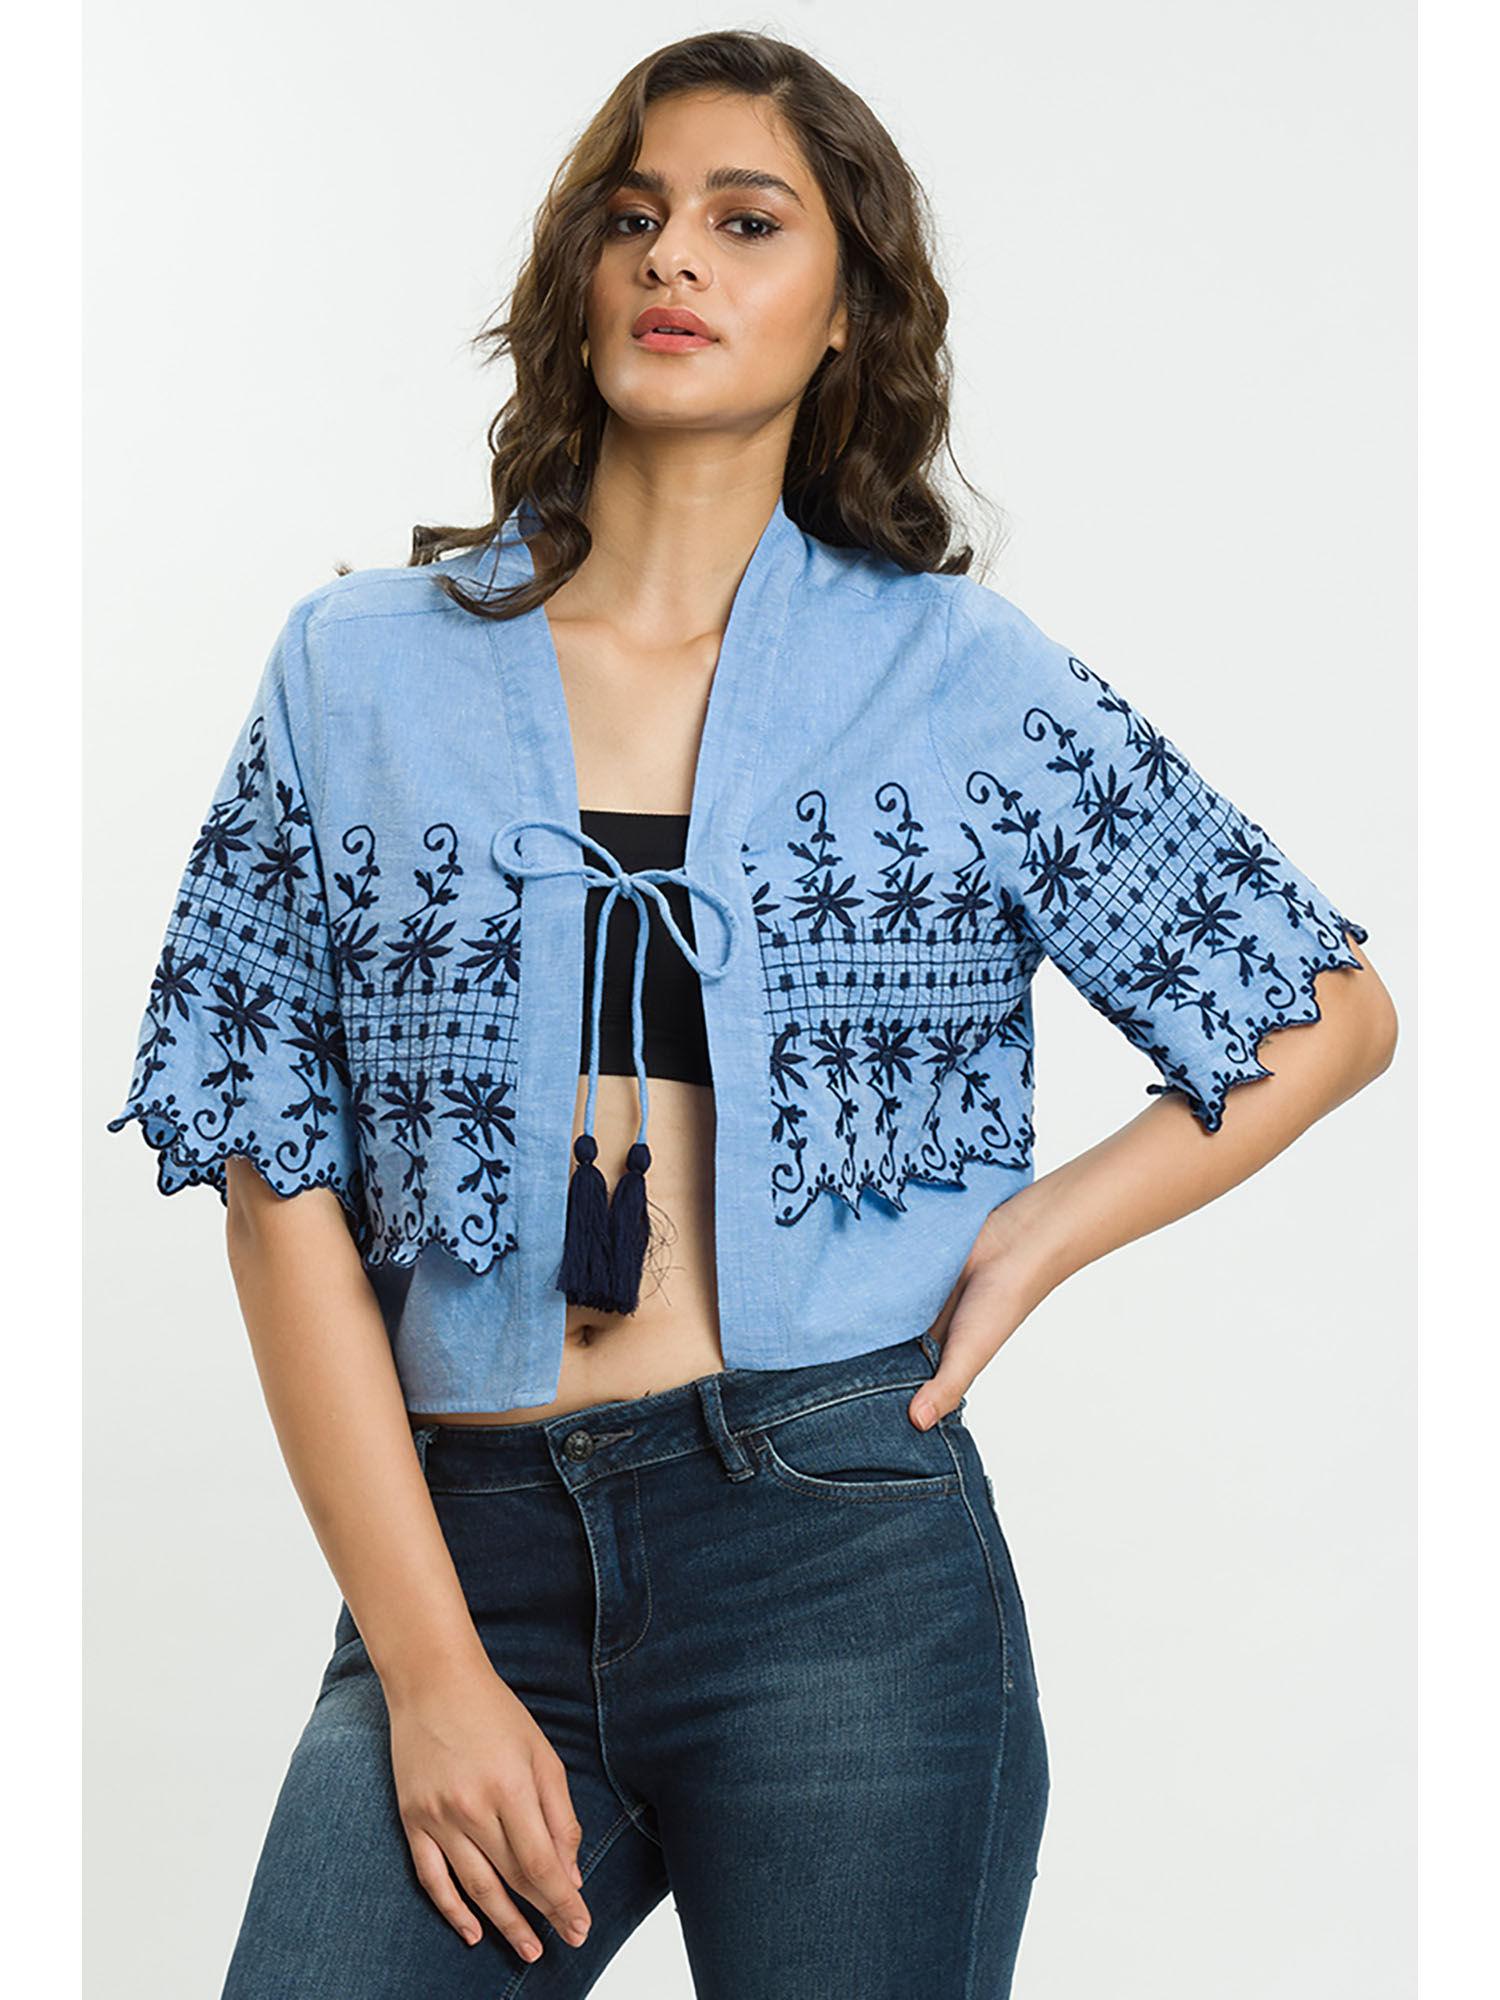 blue tassel jacket with embroidery and tie detail